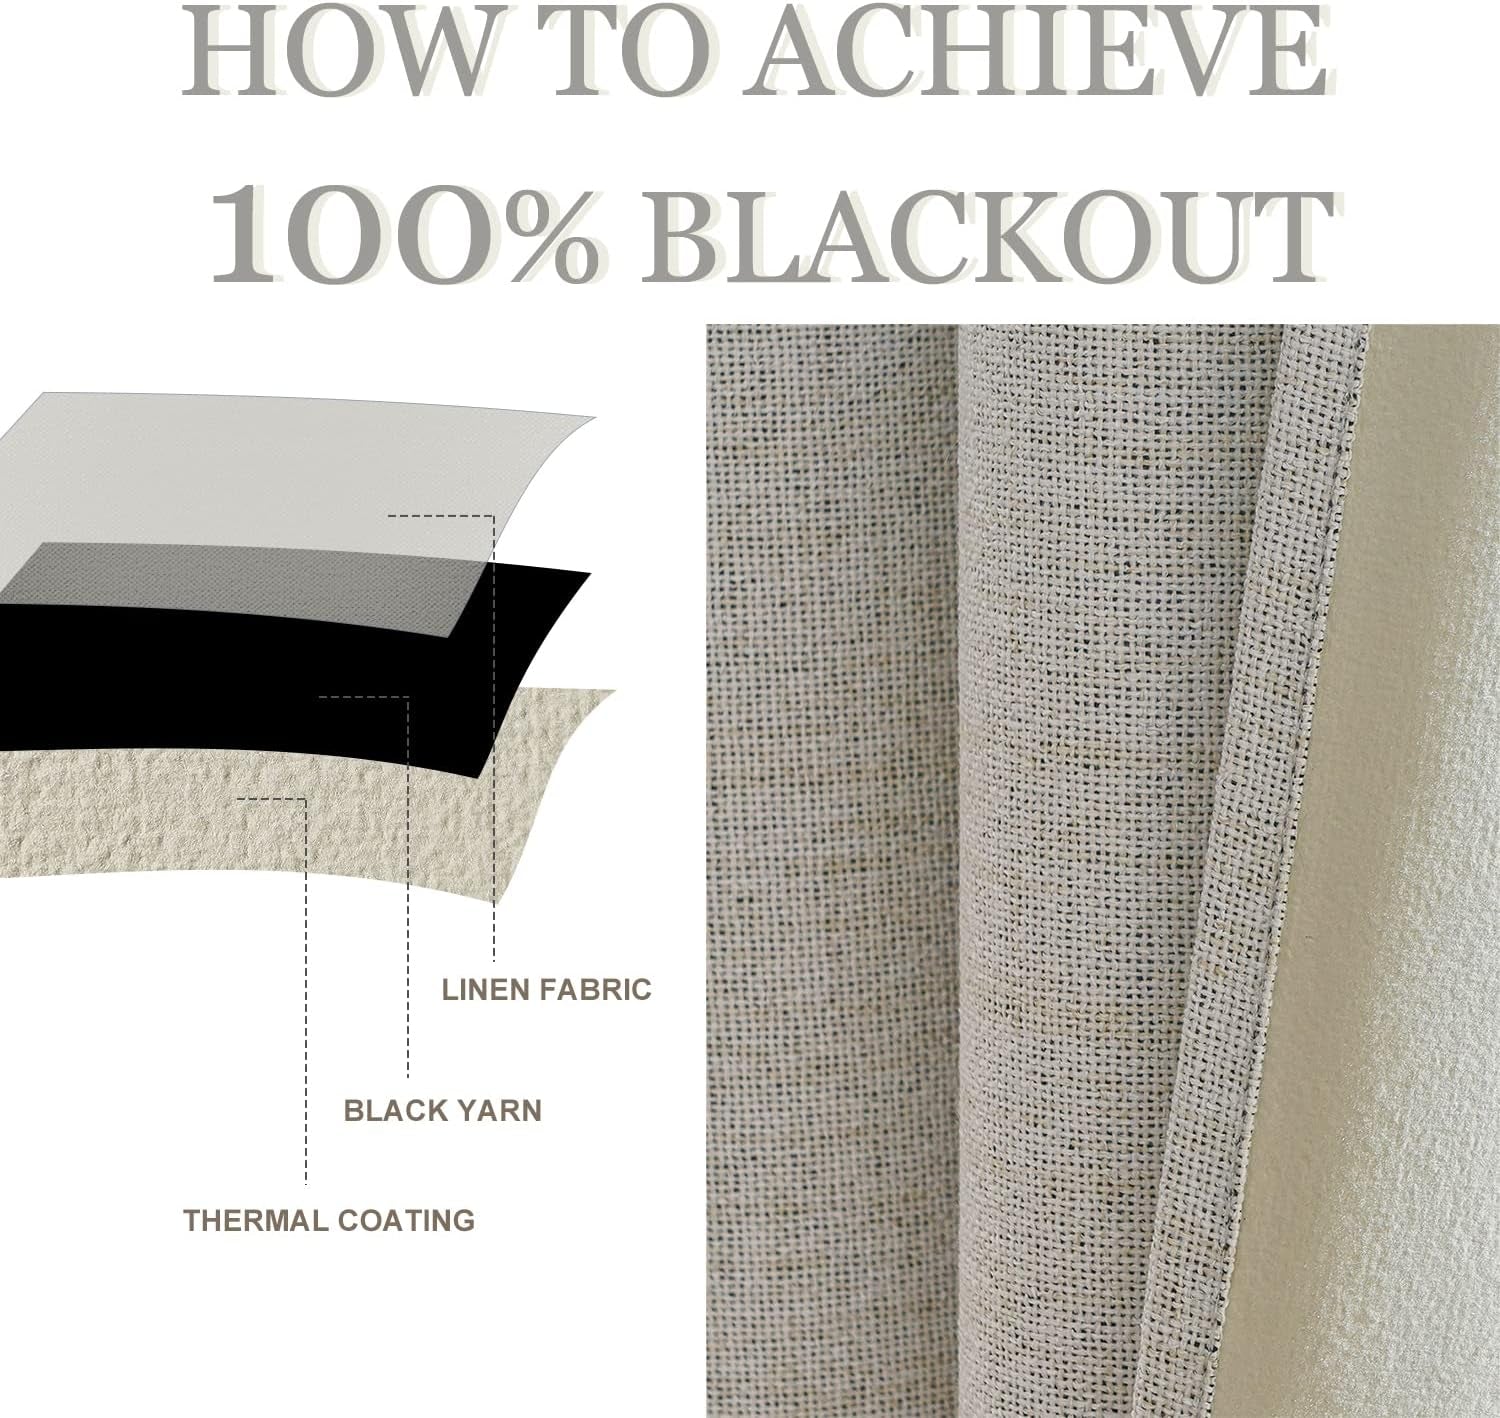 Topfinel Blackout Curtains,Linen 100% Black Out Curtains for Bedroom,Textured Thermal Insulated Window Curtains Drapes for Living Room 84 Inch Rod Pocket,Energy Efficient Curtains,2 Panels Set,Natural  Top Fine   